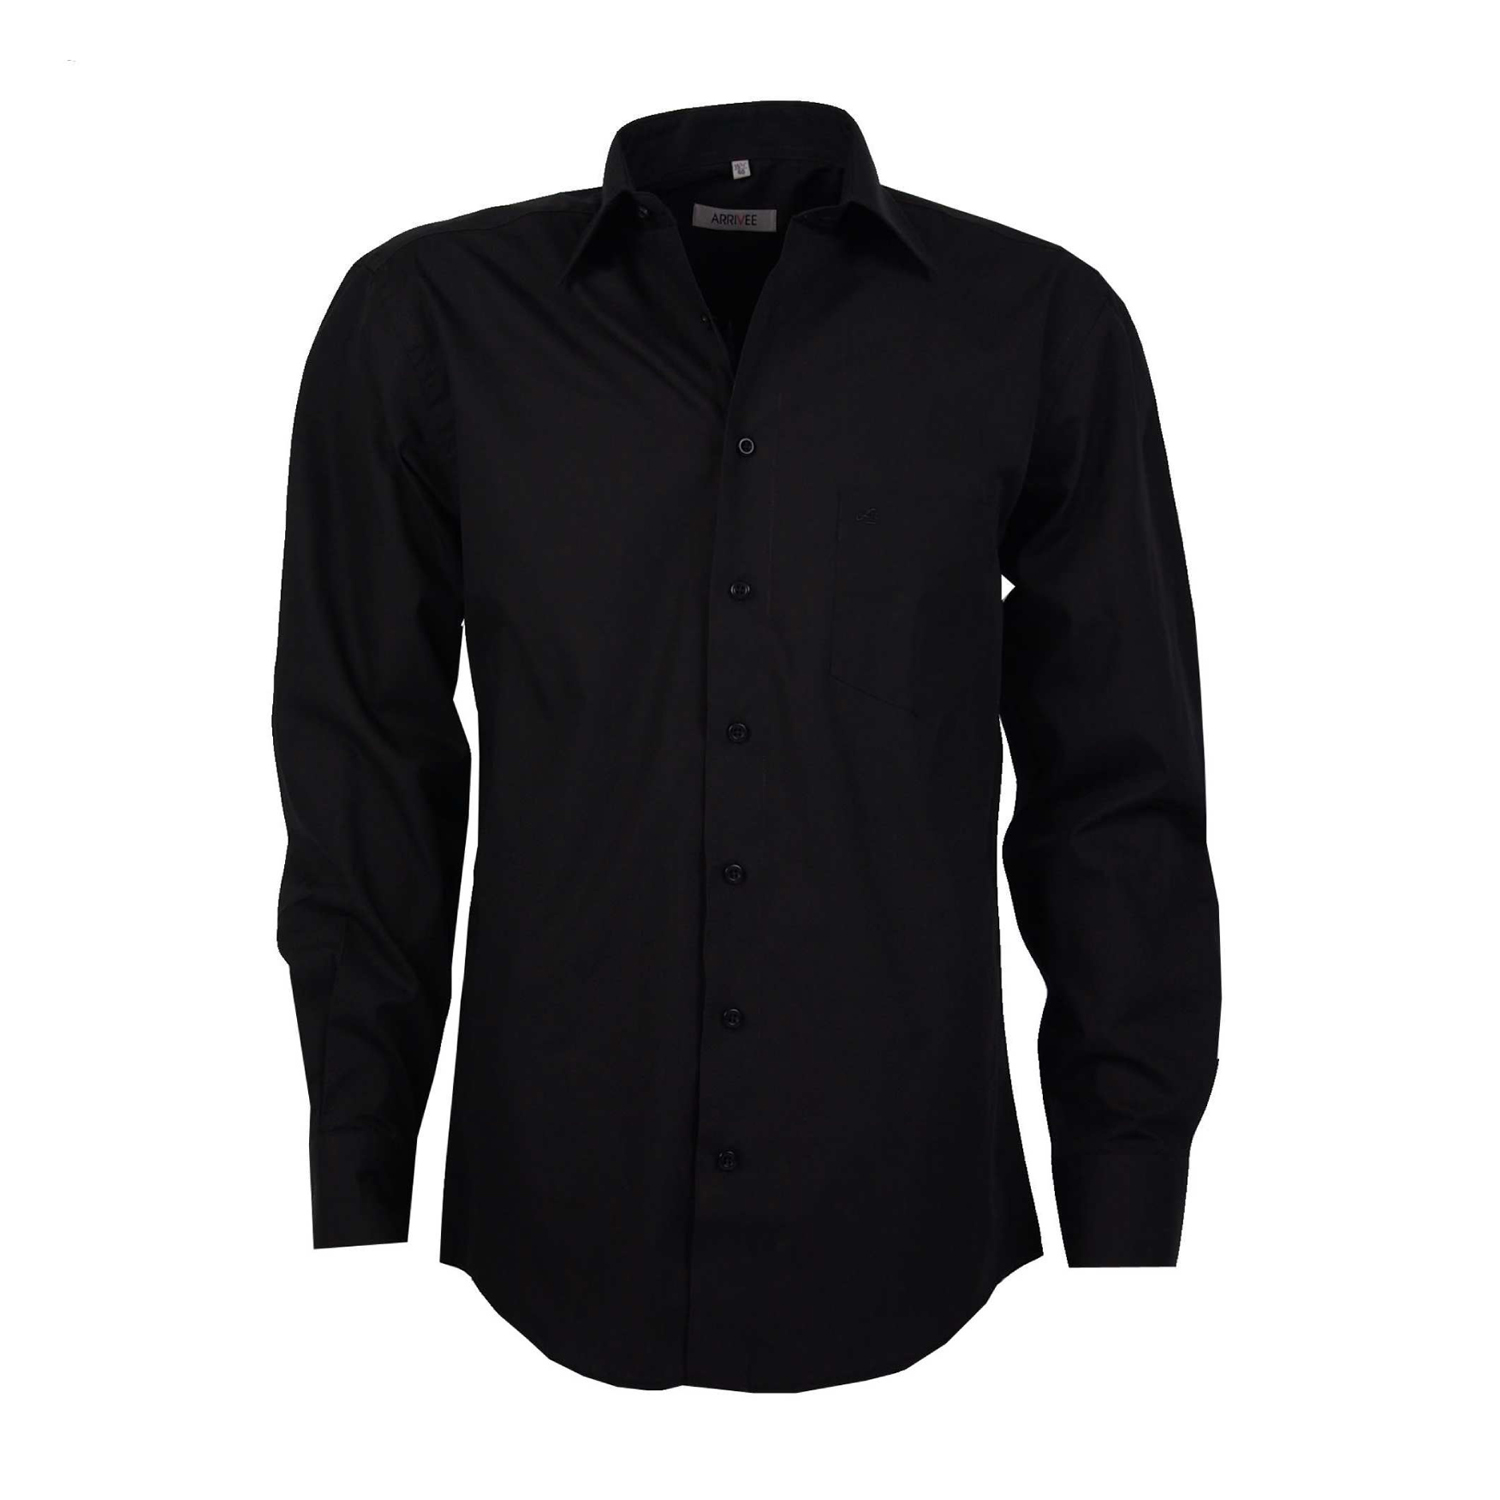 Black shirt by ARRIVEE in oversizes up to 8XL